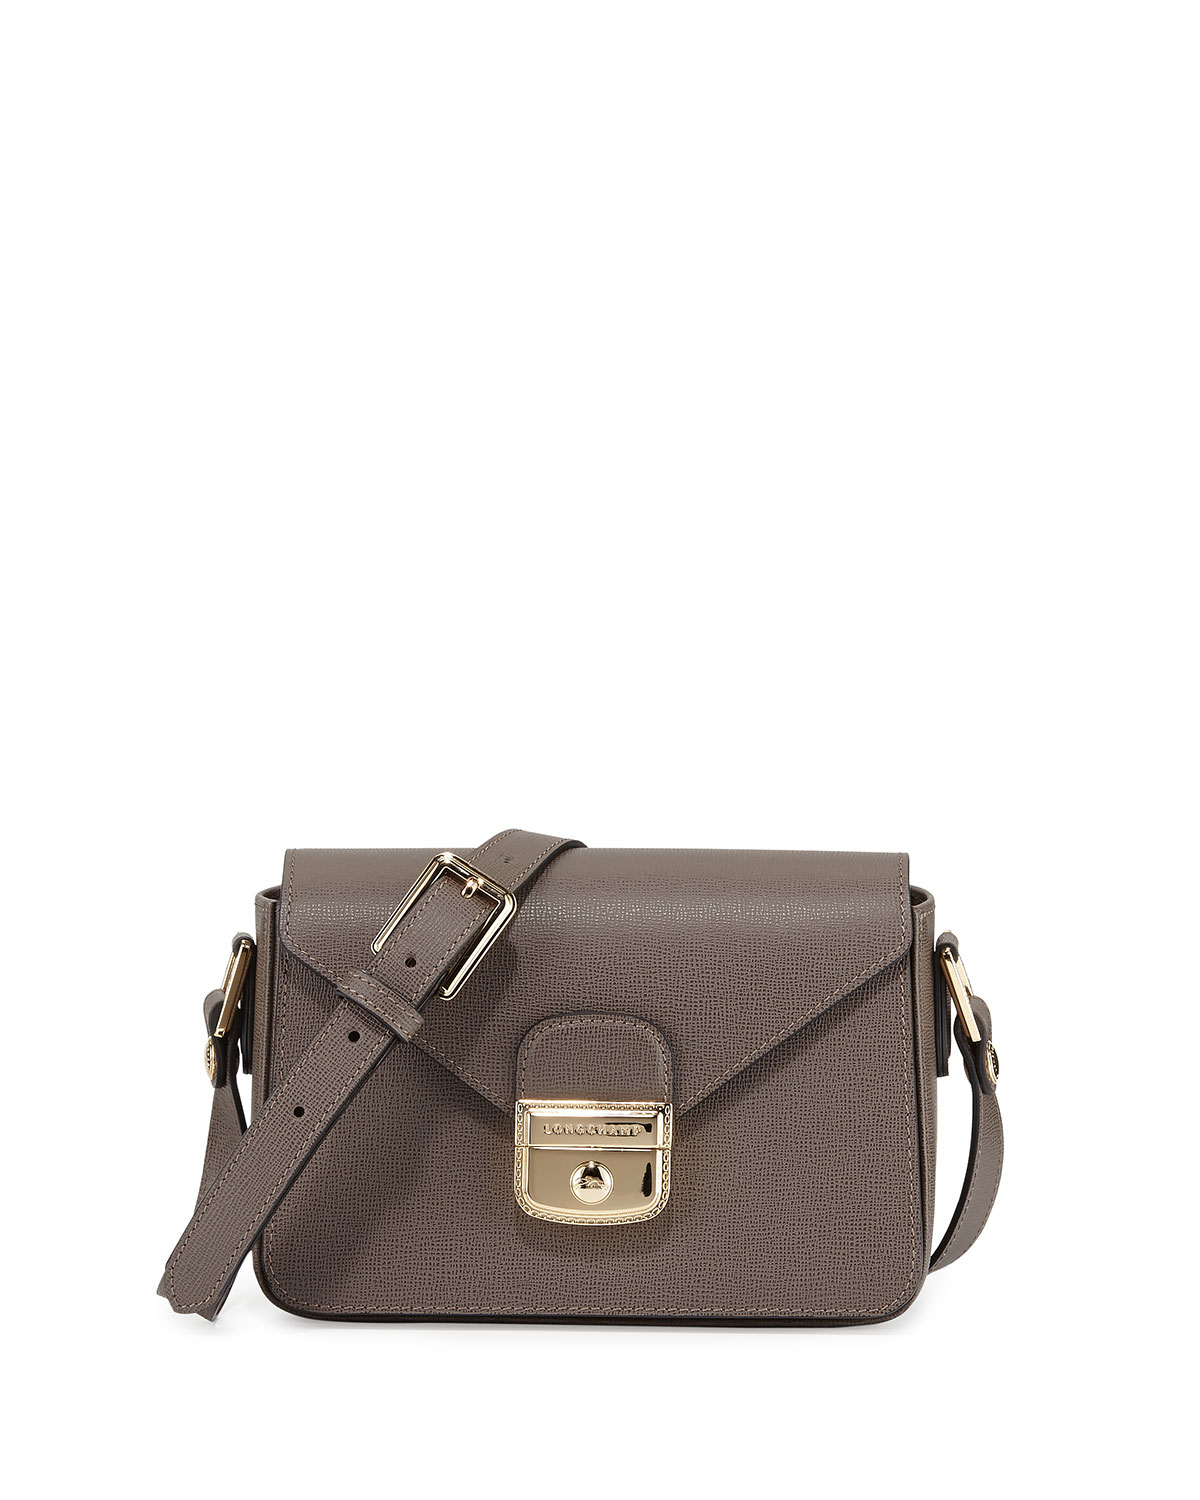 Lyst - Longchamp Le Pliage Heritage Small Crossbody Bag in Gray